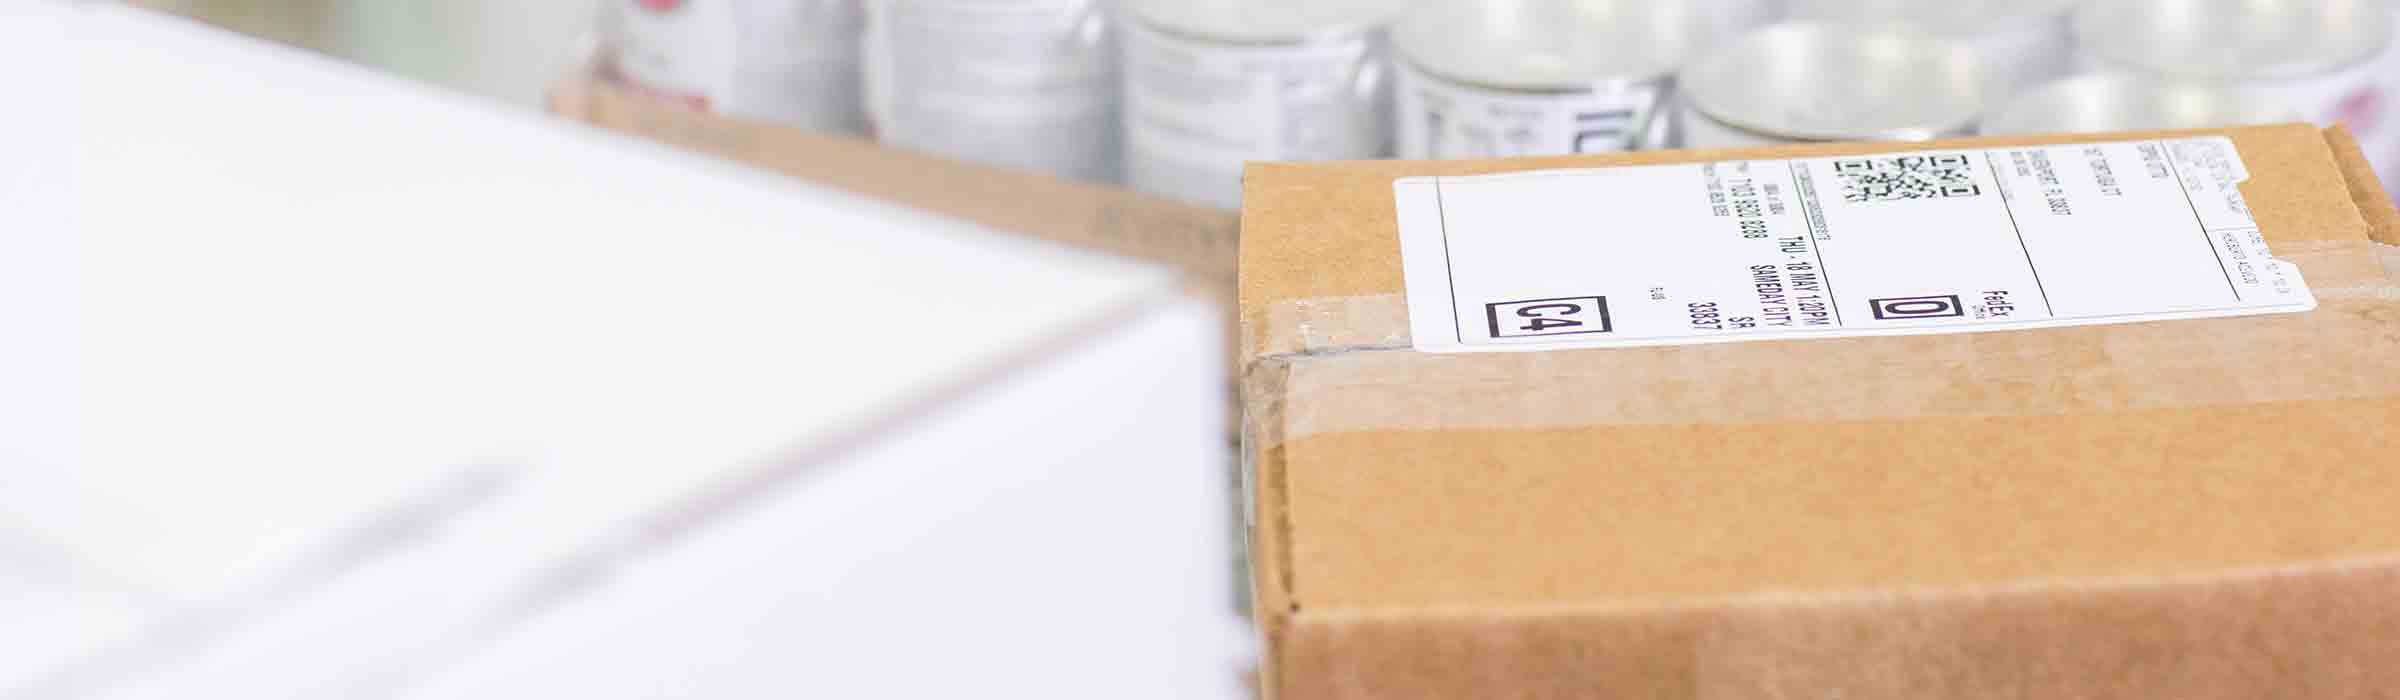 How To Complete Shipping Labels And Shipping Documents | Fedex With Fedex Label Template Word